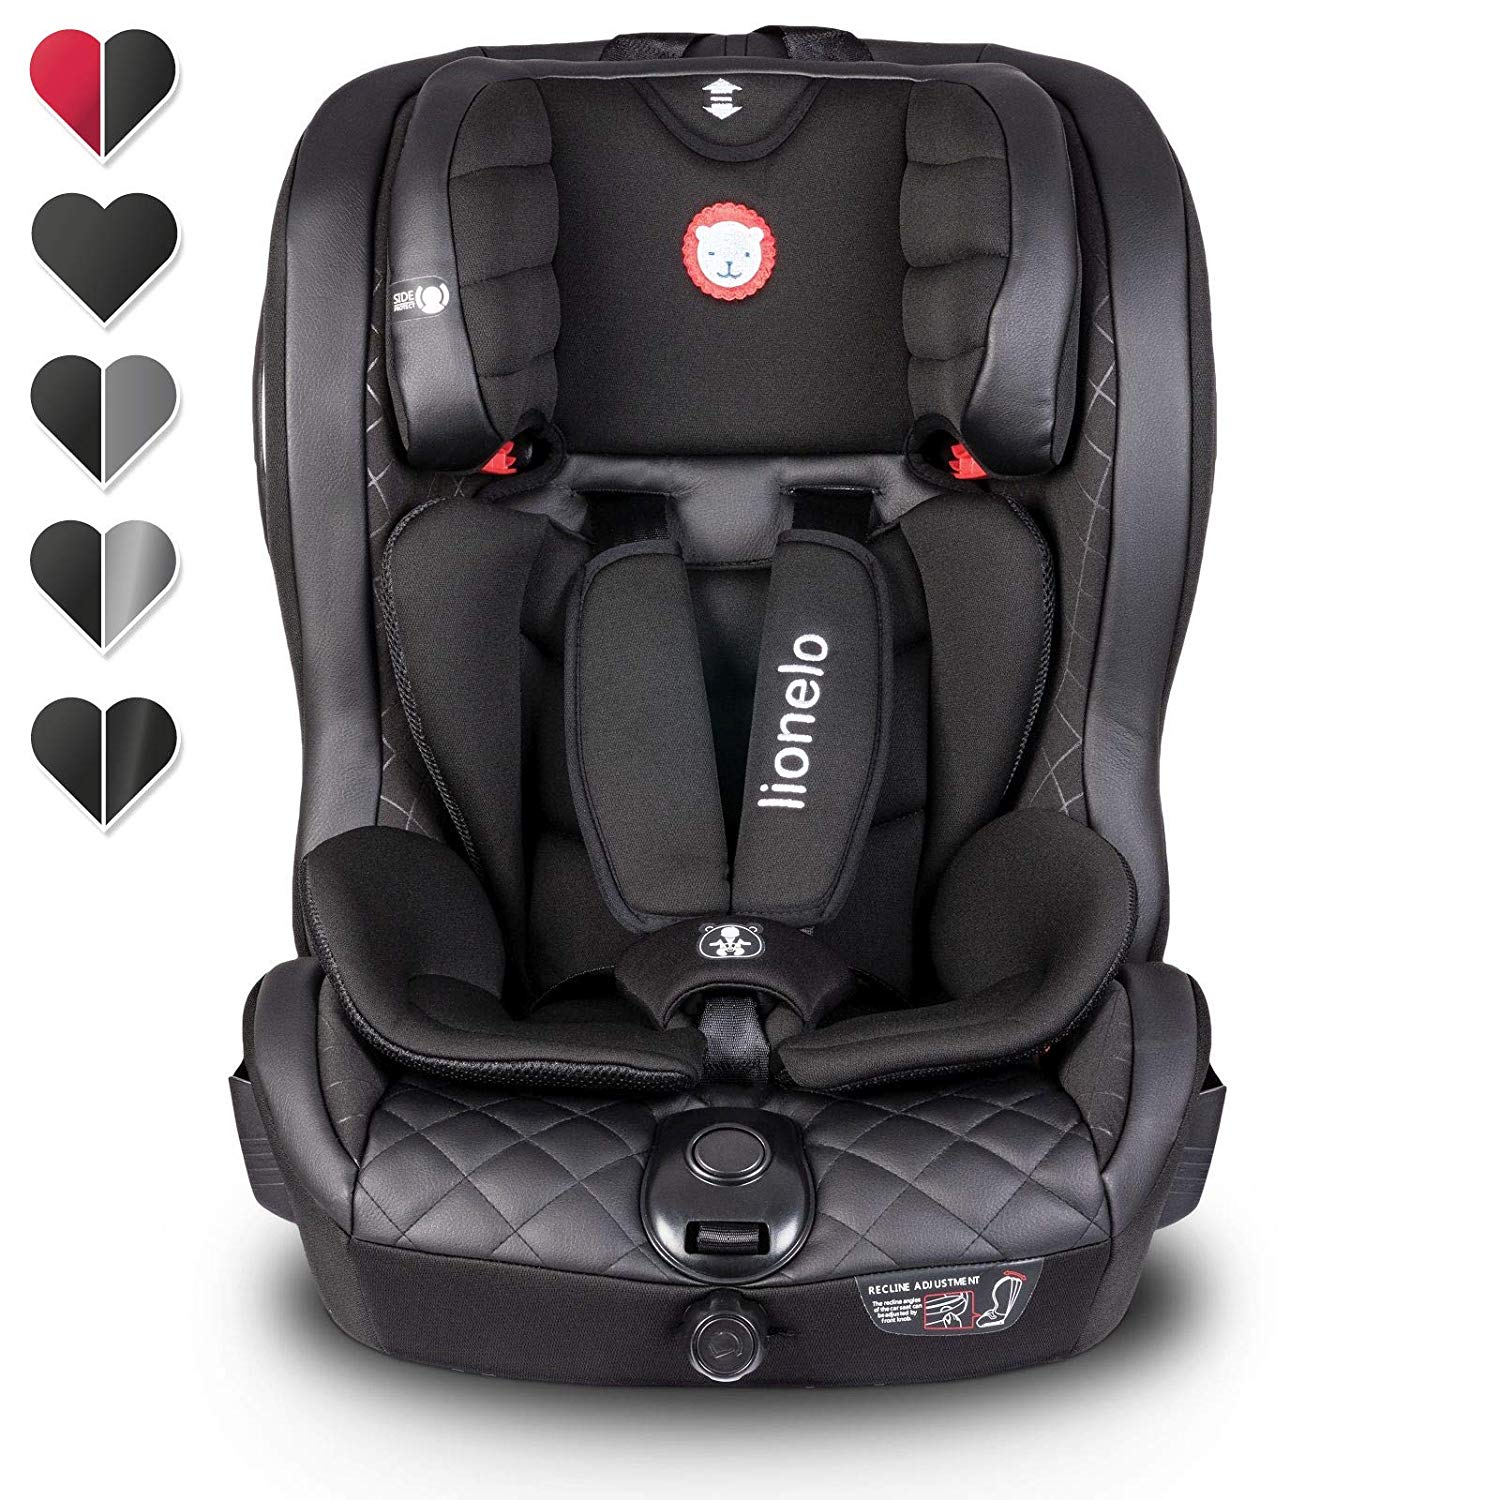 Lionelo Adriaan Child Car Seat Group 1, 2, 3, Isofix, Top Tether, Side Protection, Dri-Seat, ECE R 44/04